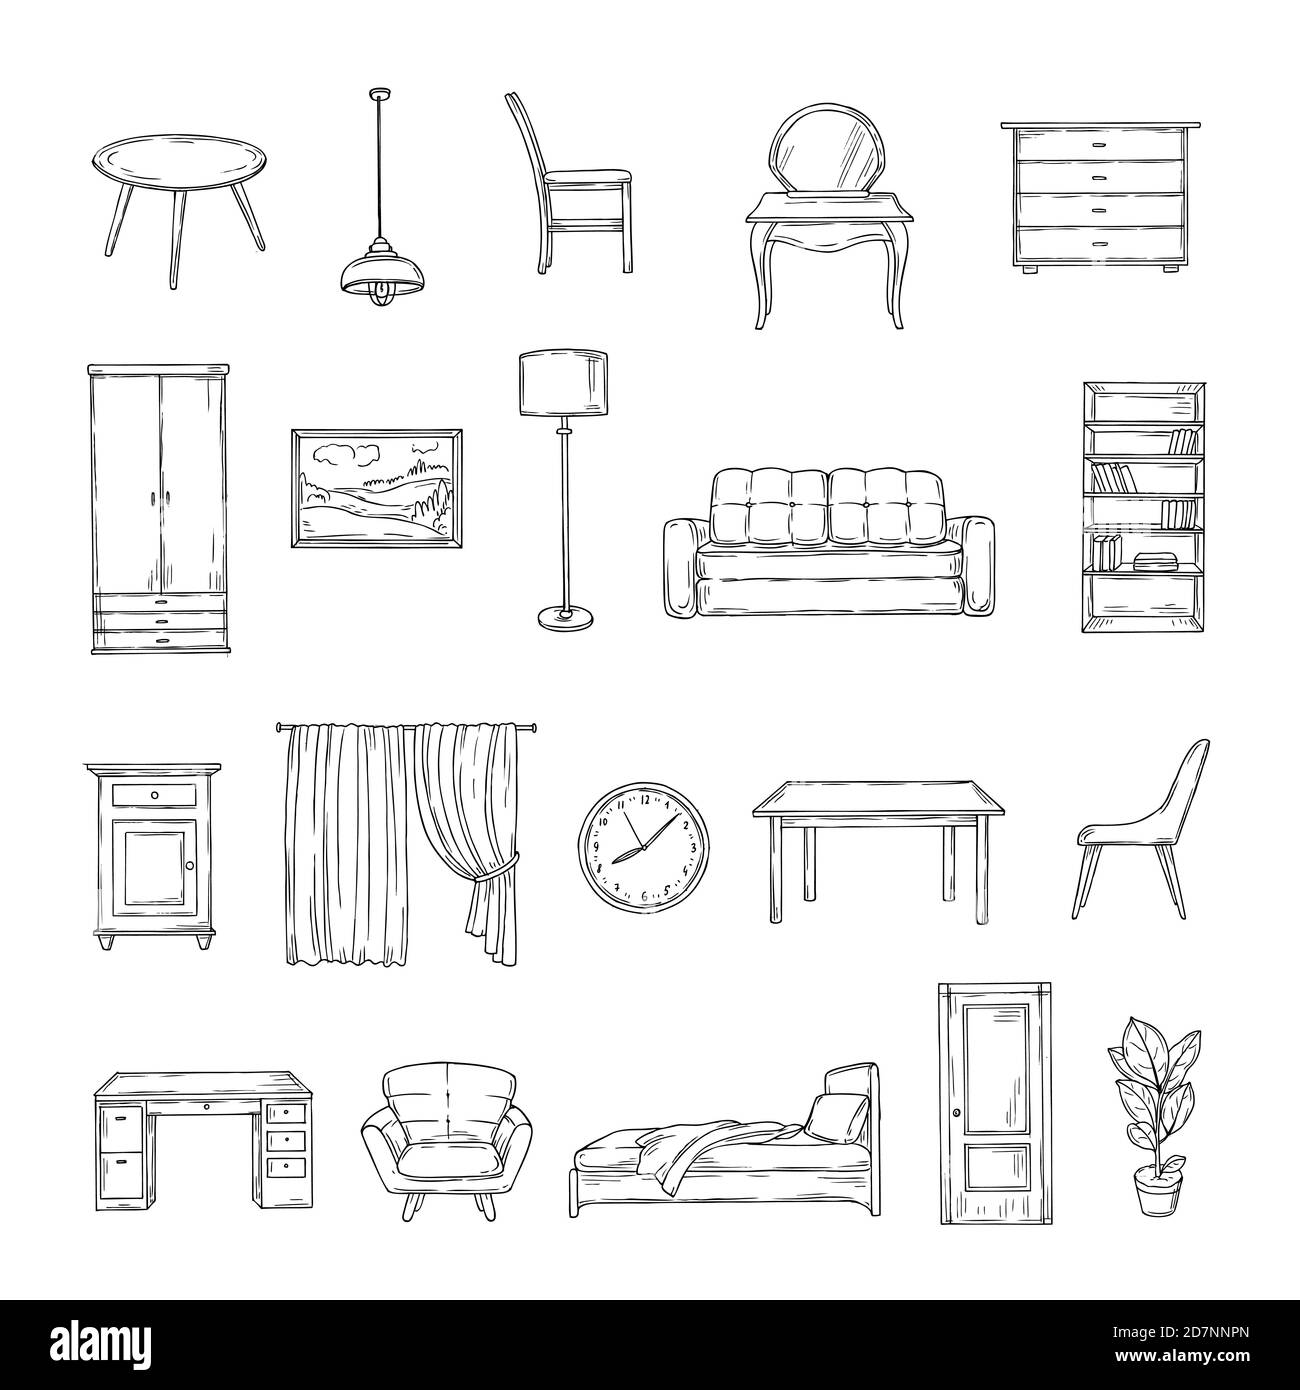 Sketch furniture. Bookcase and chairs, sofa and table, wardrobe and lamp home plants. Interior vintage hand drawn isolated elements. Furniture interior, table and sofa, chair and lamp illustraion Stock Vector